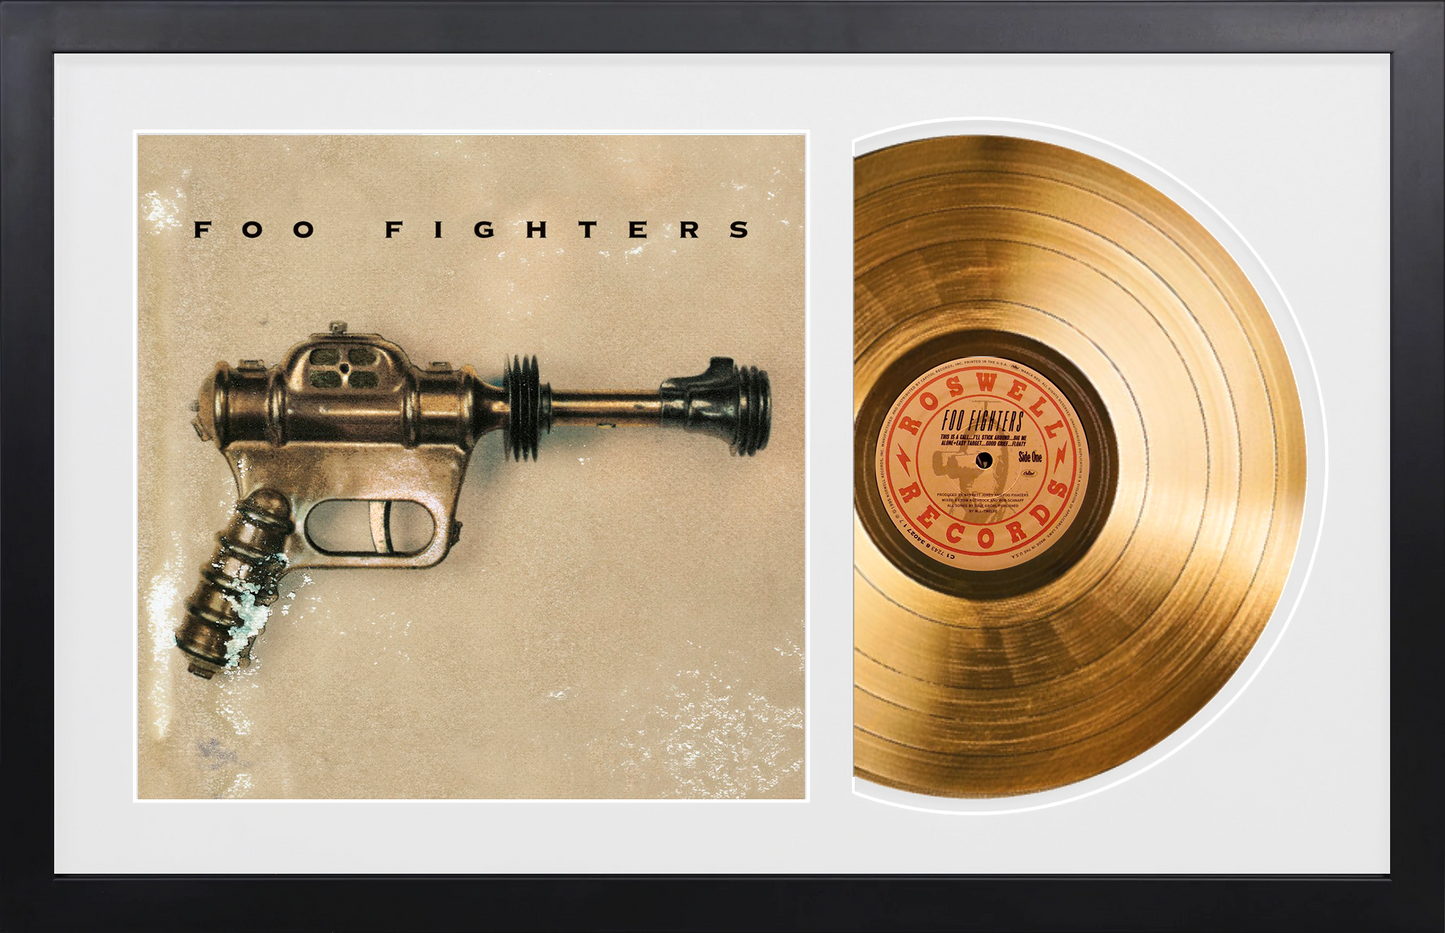 Foo Fighters - Foo Fighters - 14K Gold Plated, Limited Edition Album